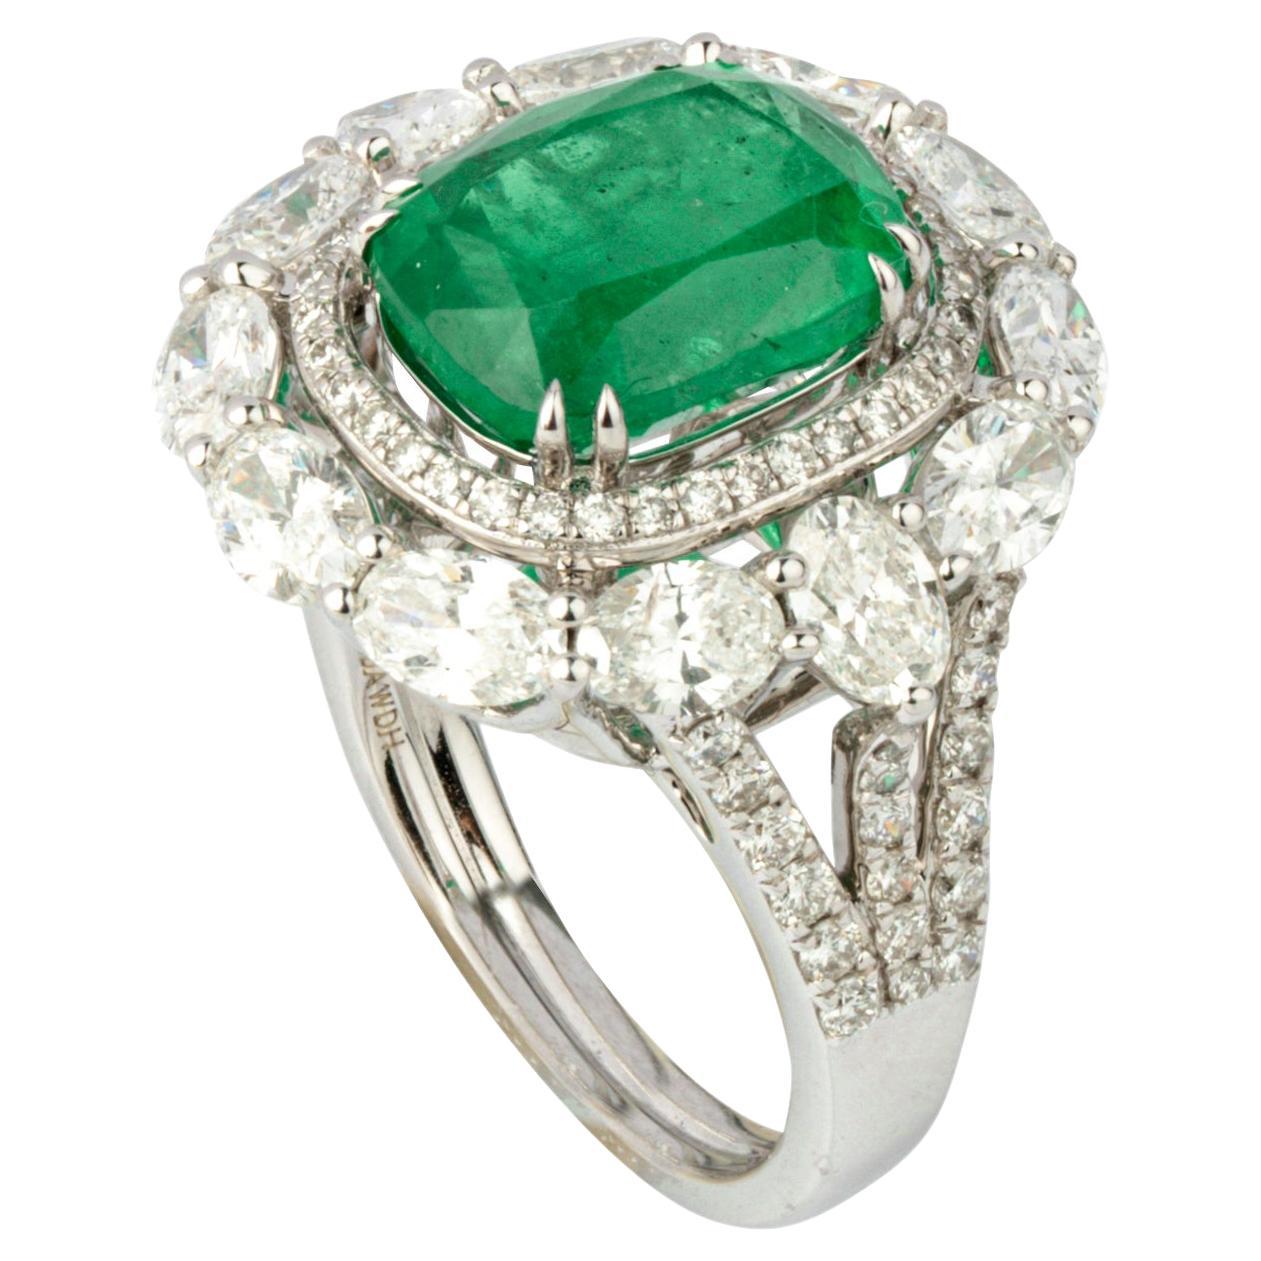  6.16 Ct Natural Zambian Emerald & 1.86 Ct Natural Diamond Ring in 18KW Gold For Sale